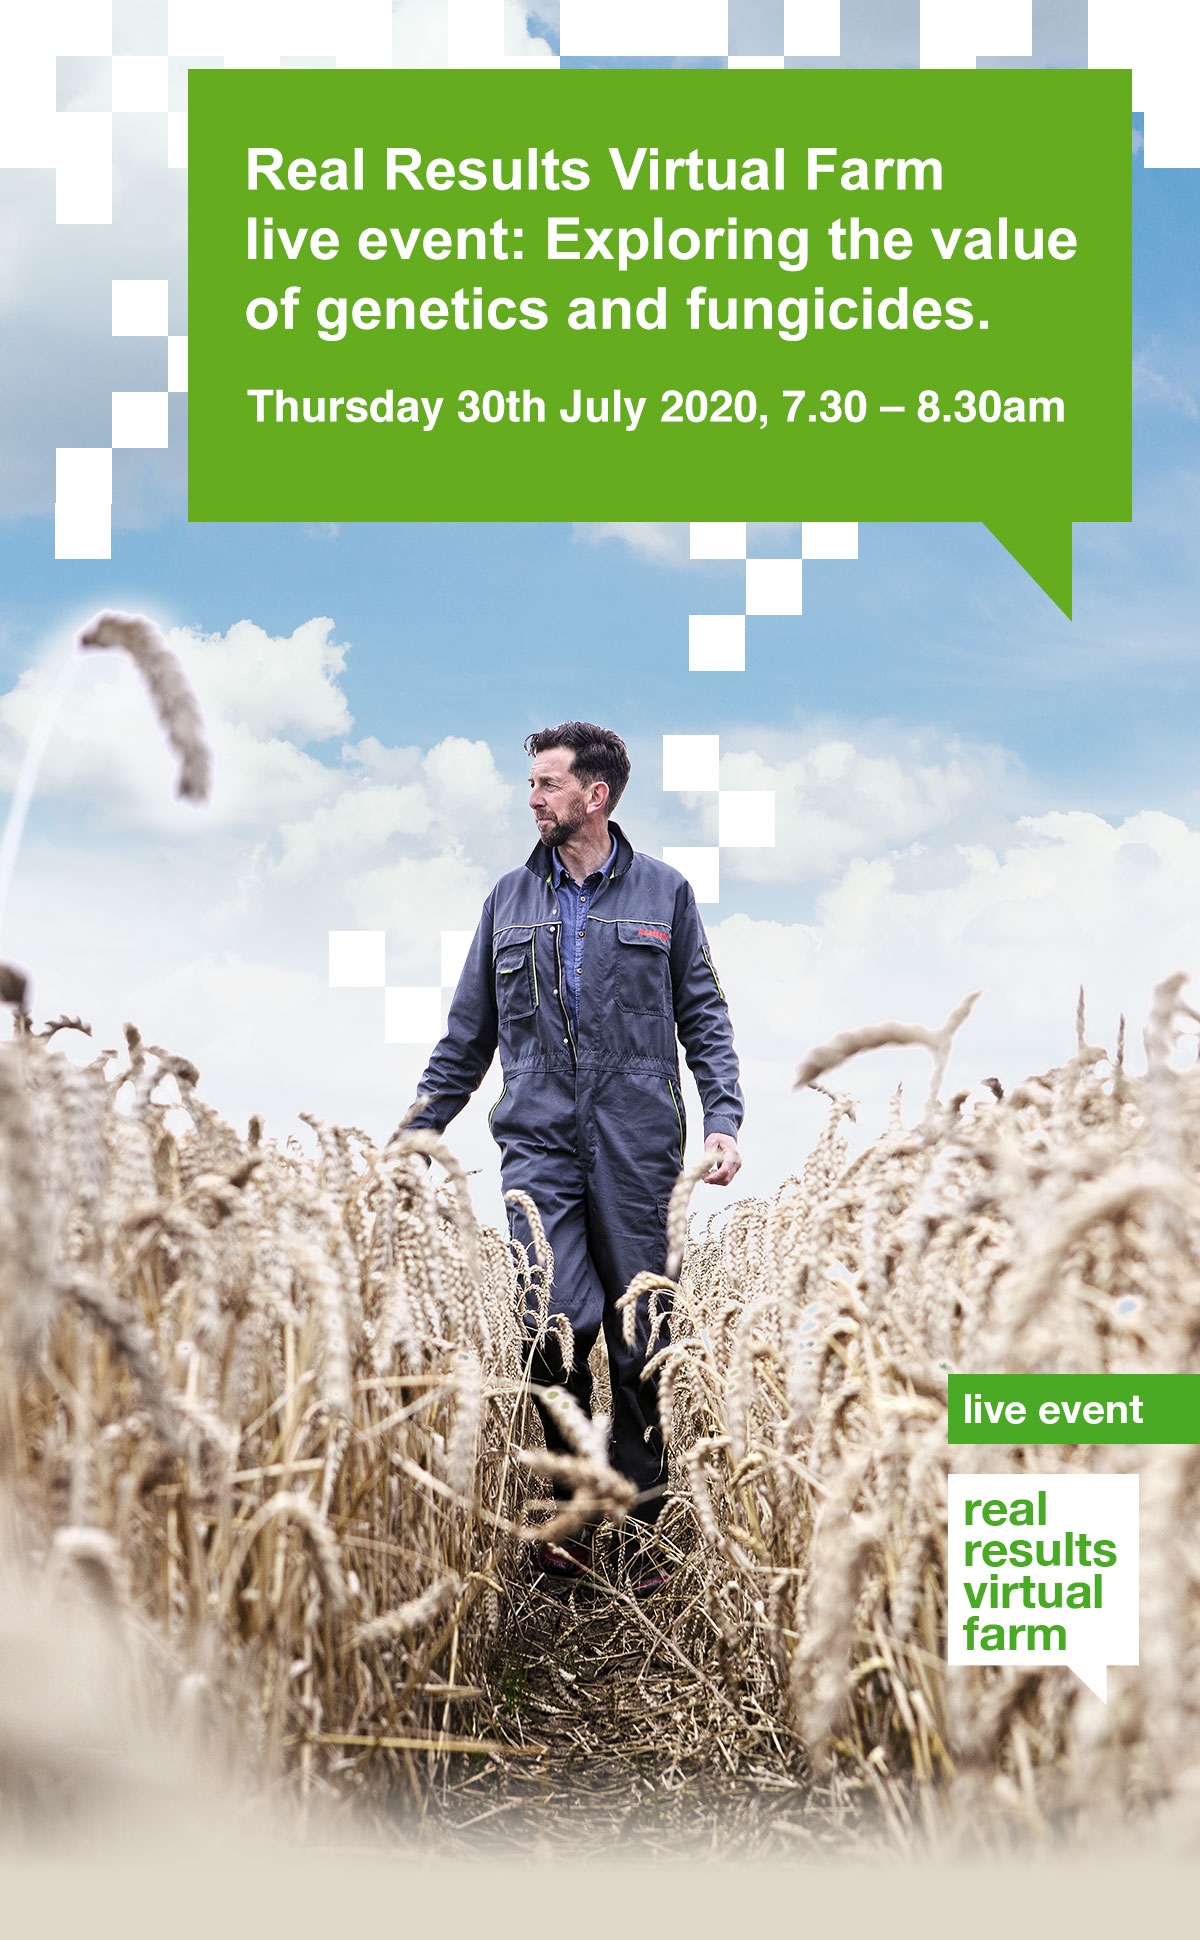 Real Results Virtual Farm live event: Exploring the value of genetics and fungicides. Thursday 30th July 2020, 7.30 - 8.30am